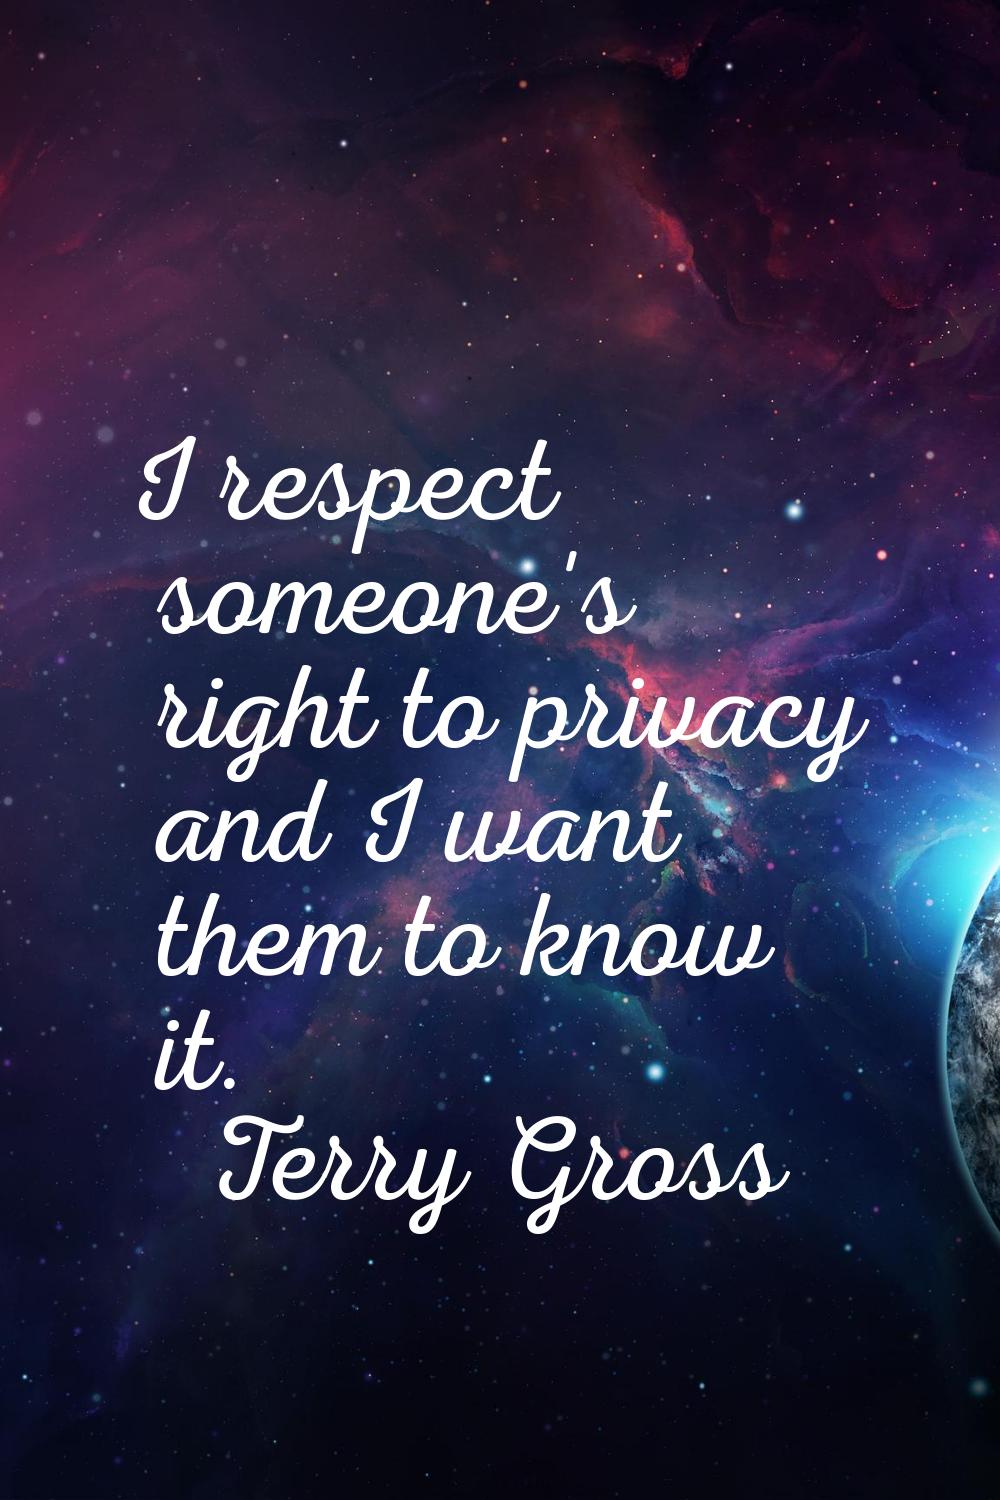 I respect someone's right to privacy and I want them to know it.